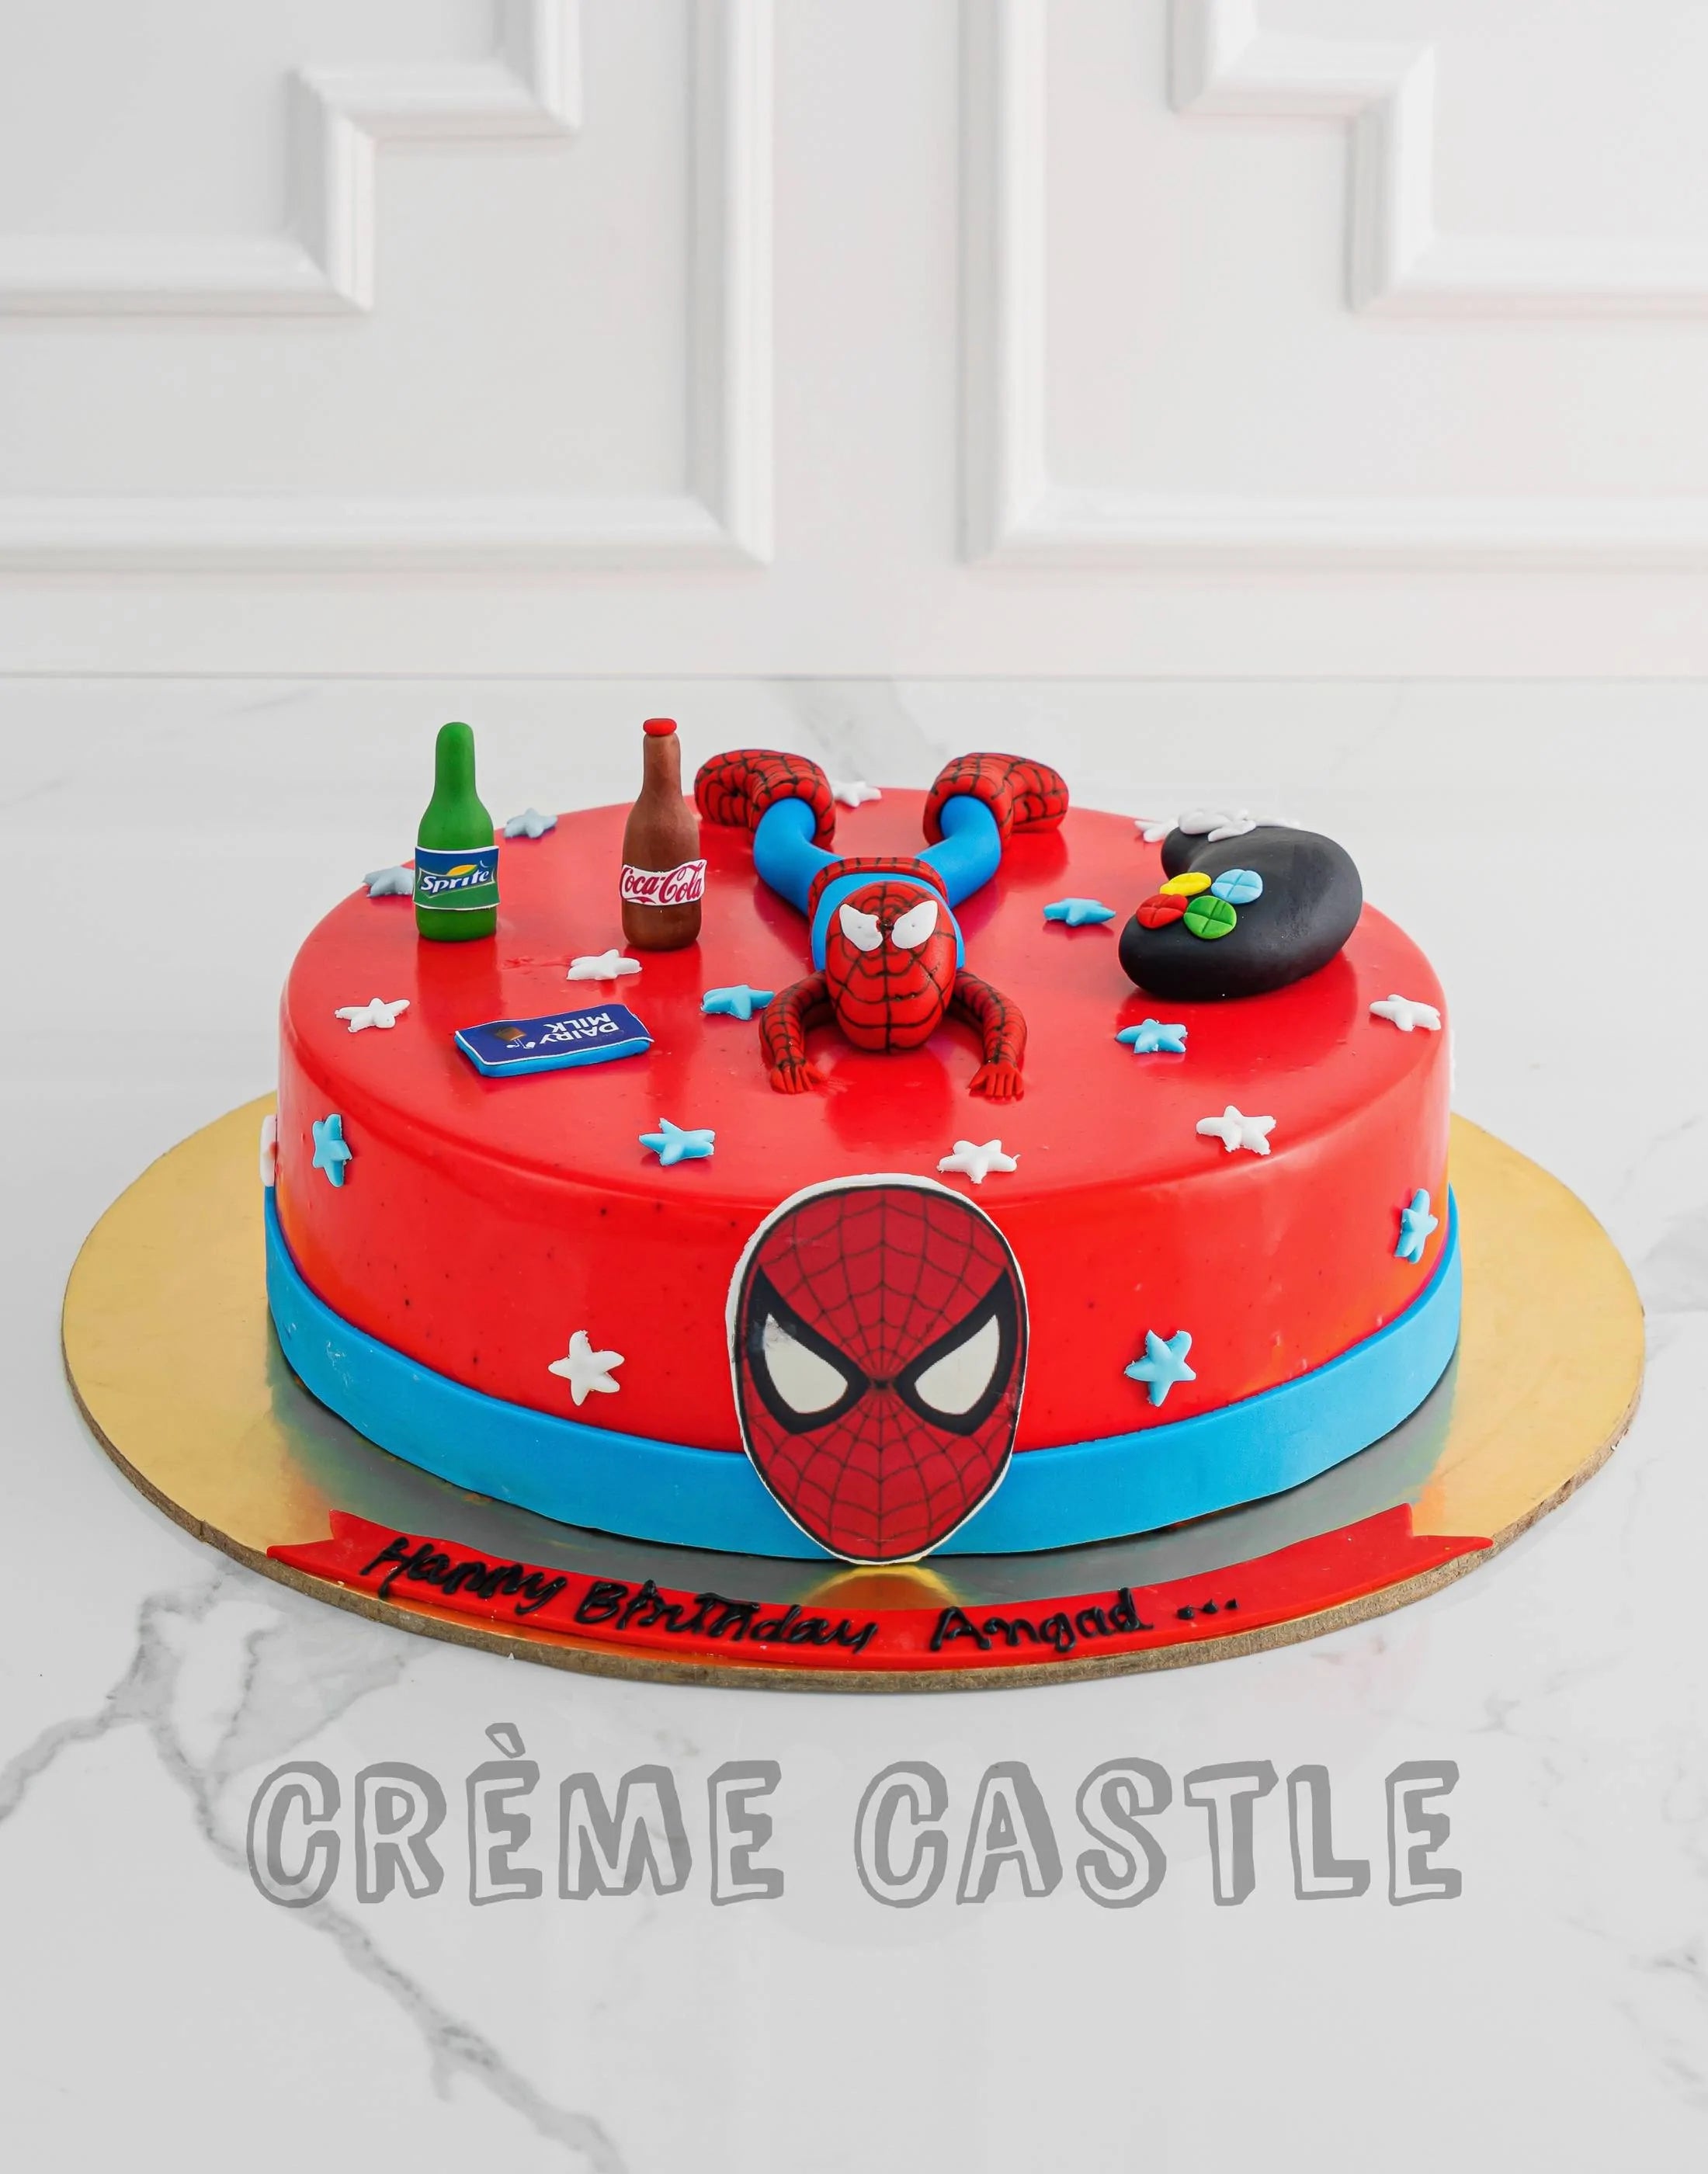 30 Best Spiderman Cake Design Ideas for Birthdays and Events